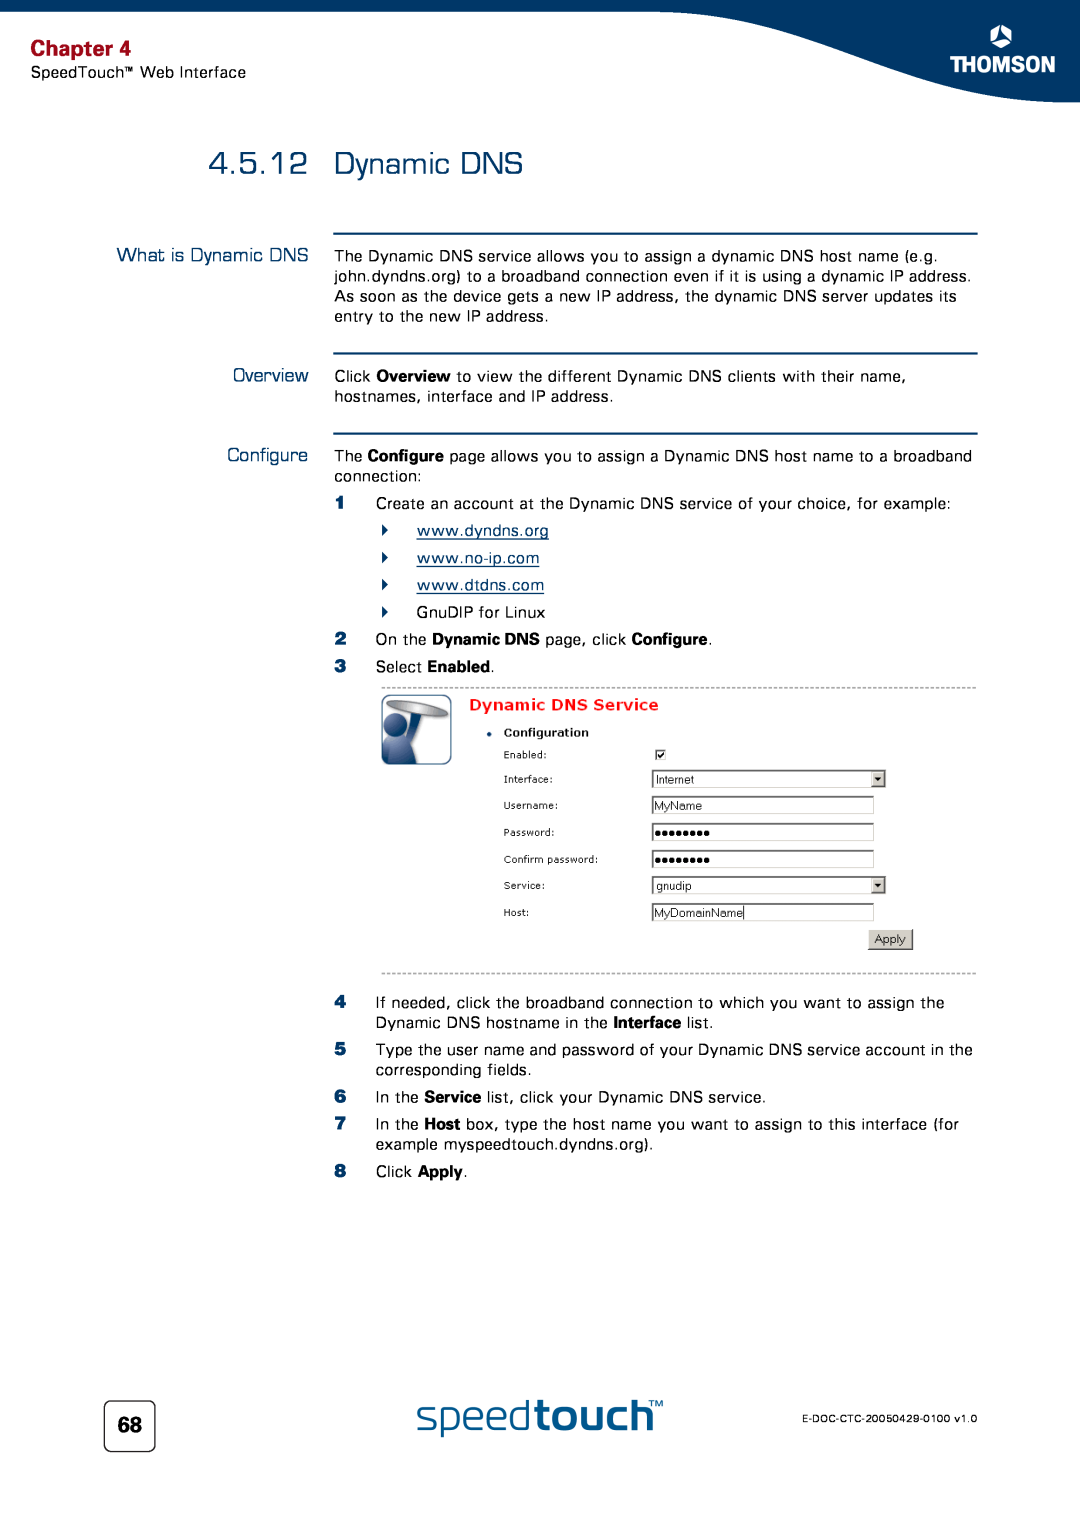 Apple TM546 manual Chapter, On the Dynamic DNS page, click Configure 